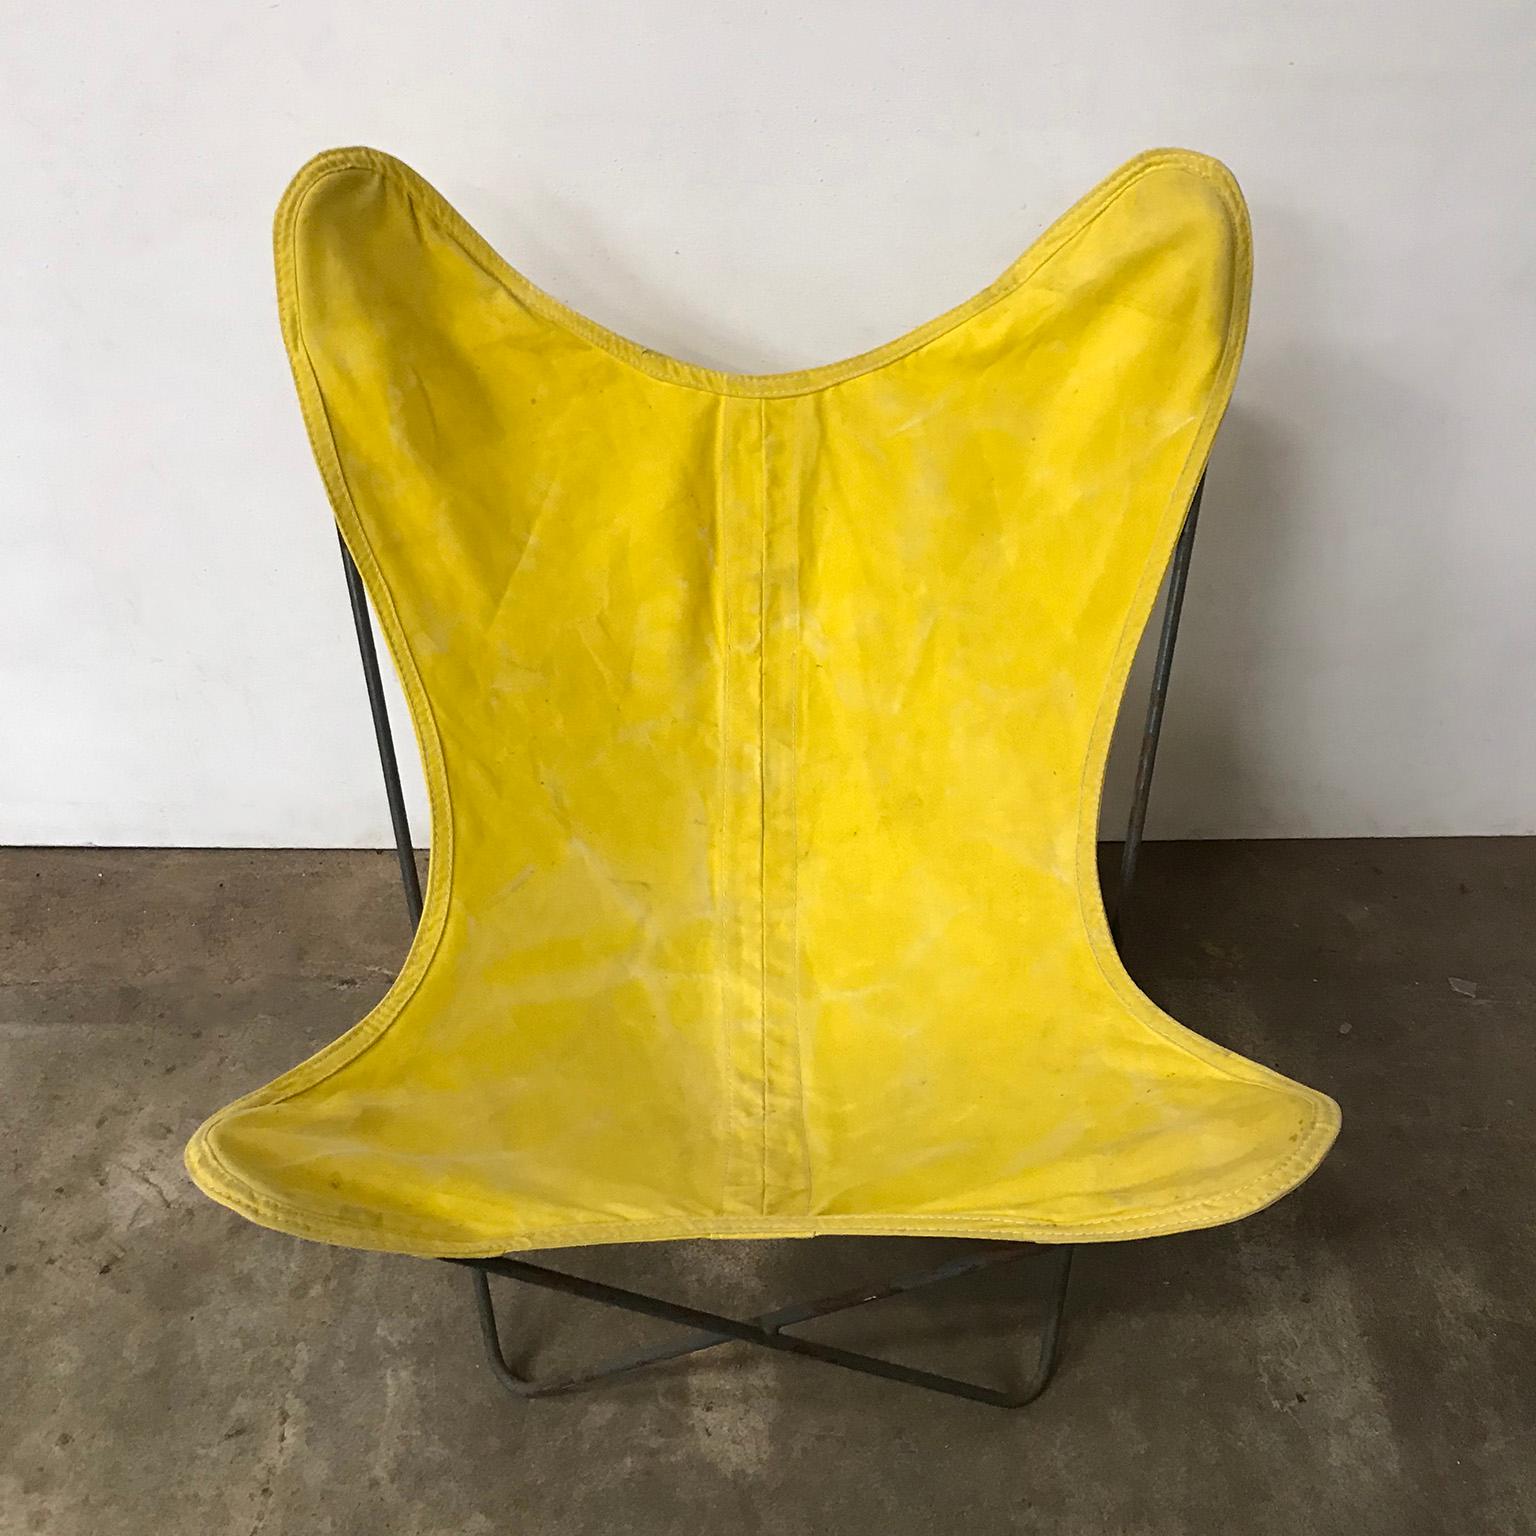 1947, Hardoy, Ferrari, Yellow Cover with Black Base Butterfly Chair 4